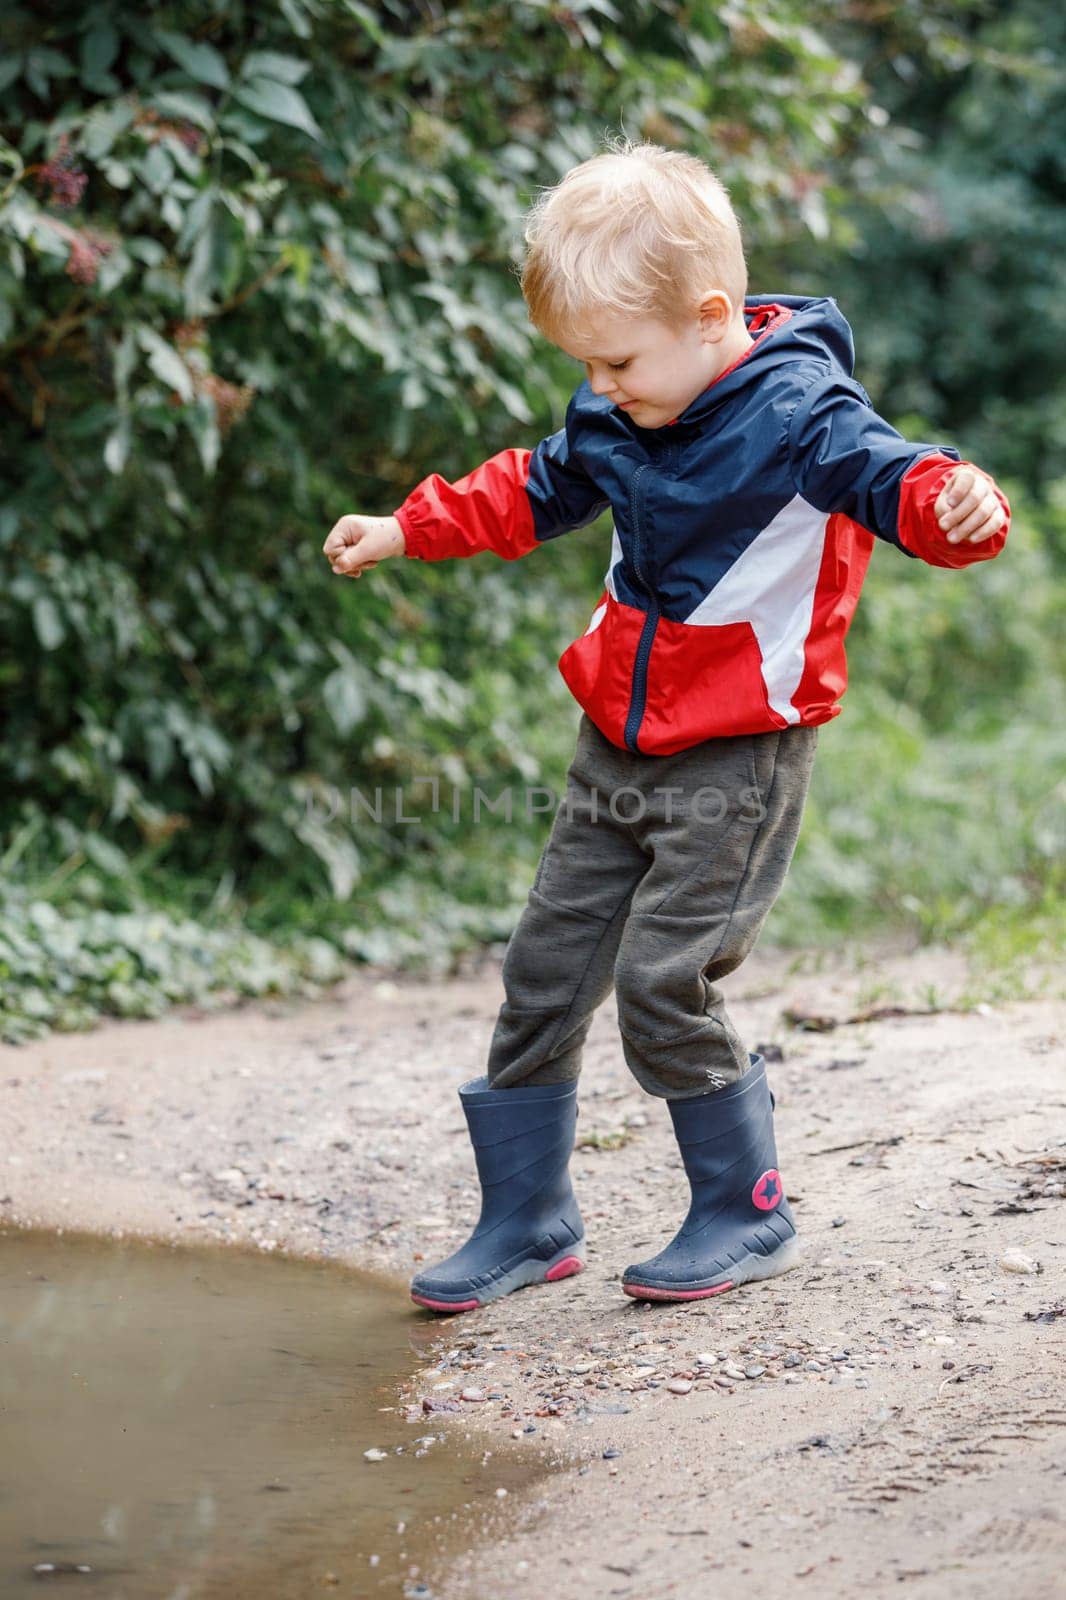 A timid little boy from the city in a red jacket, carefully trying to go the puddle.